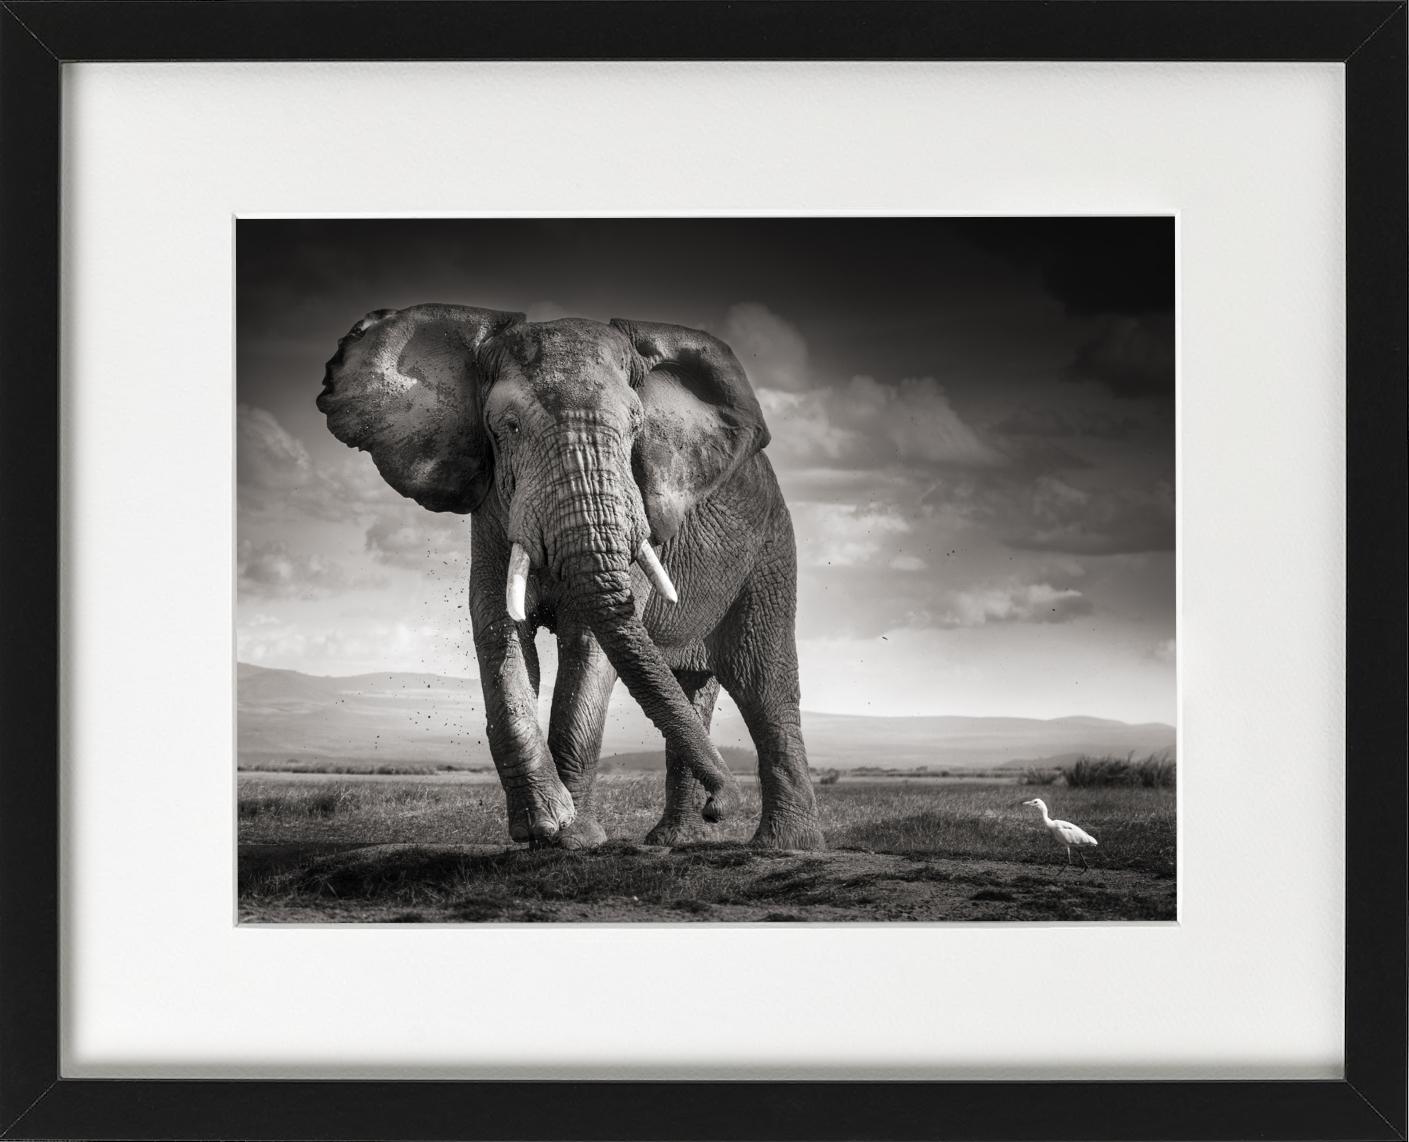 The Bull and the Bird - elephant in the desert, fine art photography, 2017 - Contemporary Photograph by Joachim Schmeisser